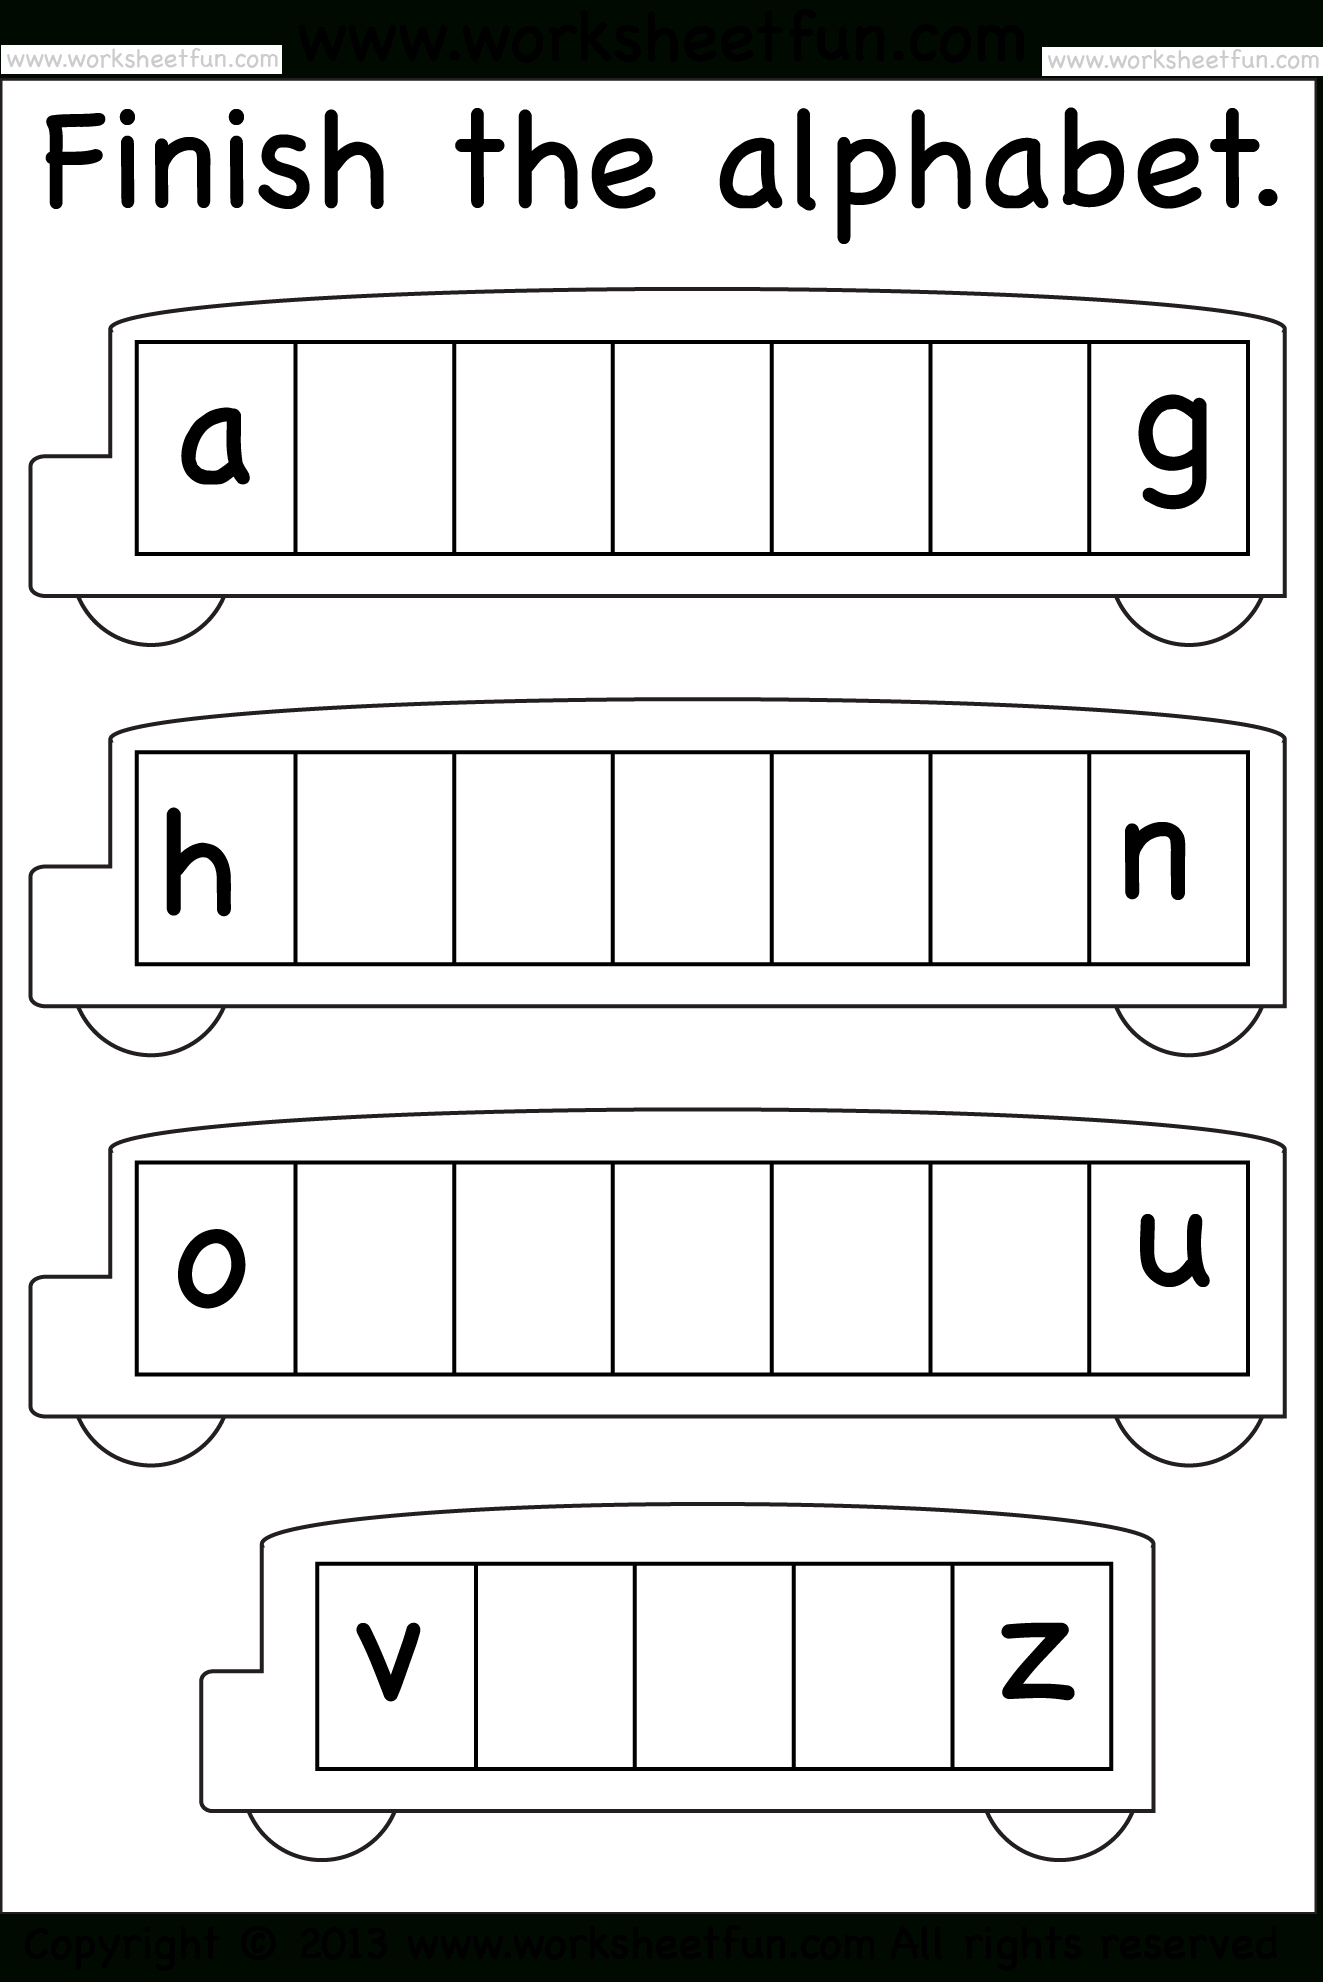 Missing Lowercase Letters – Missing Small Letters intended for Year 1 Alphabet Worksheets